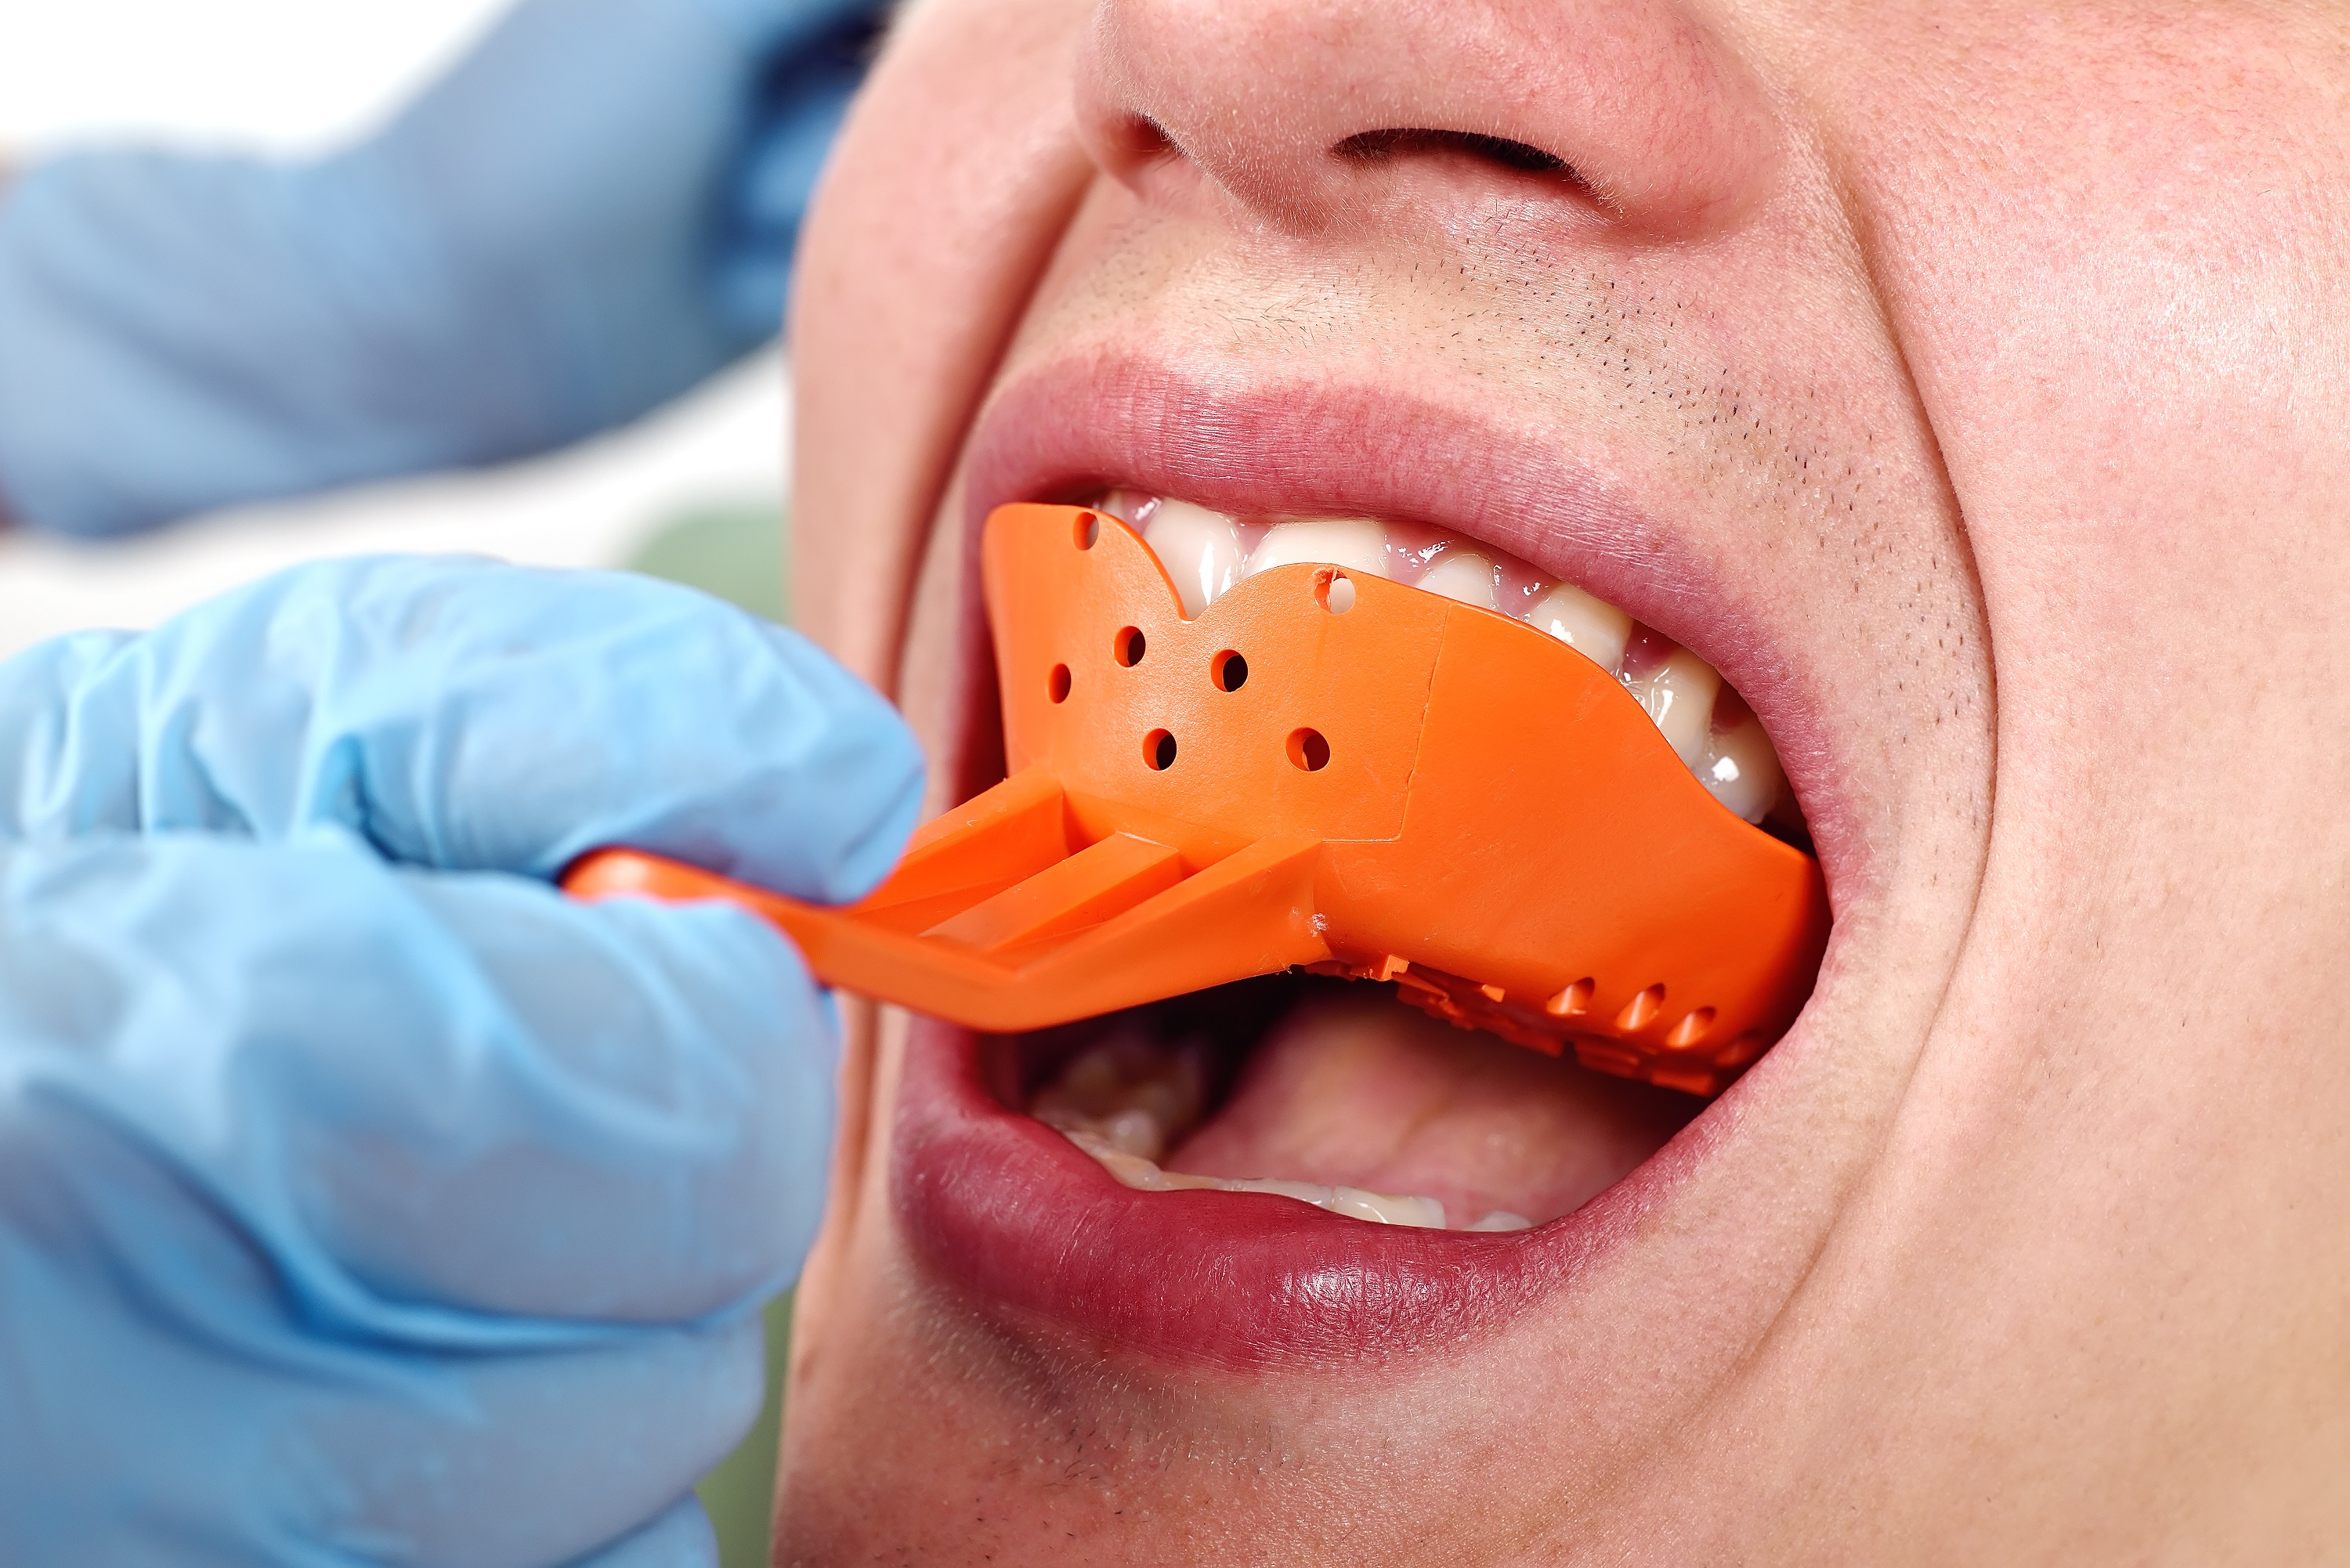 dental impressions dentures teeth impression taking types dentist immediate process pacific west